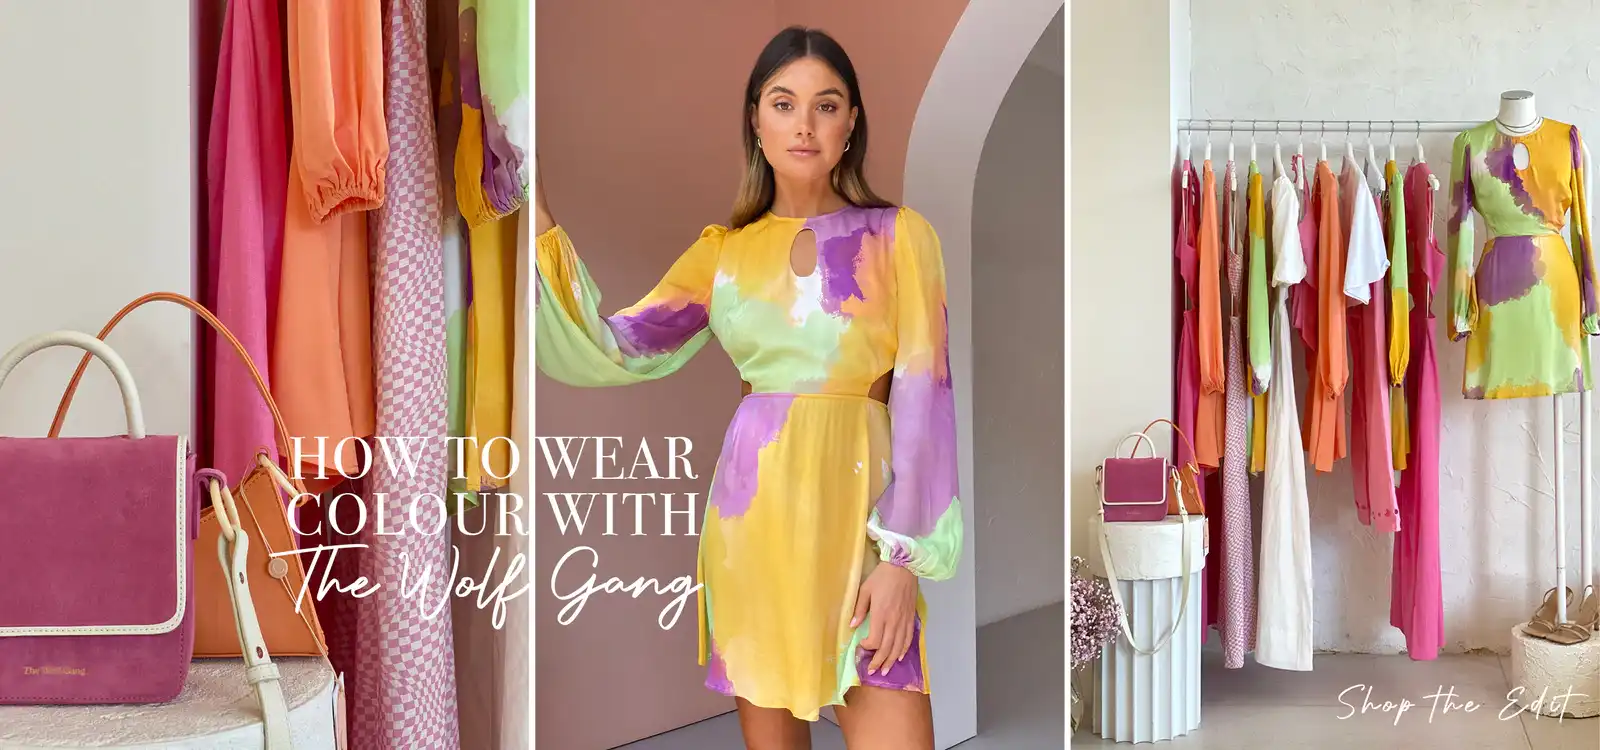 Coco & Lola up to 60% OFF on sale clothing & accessories